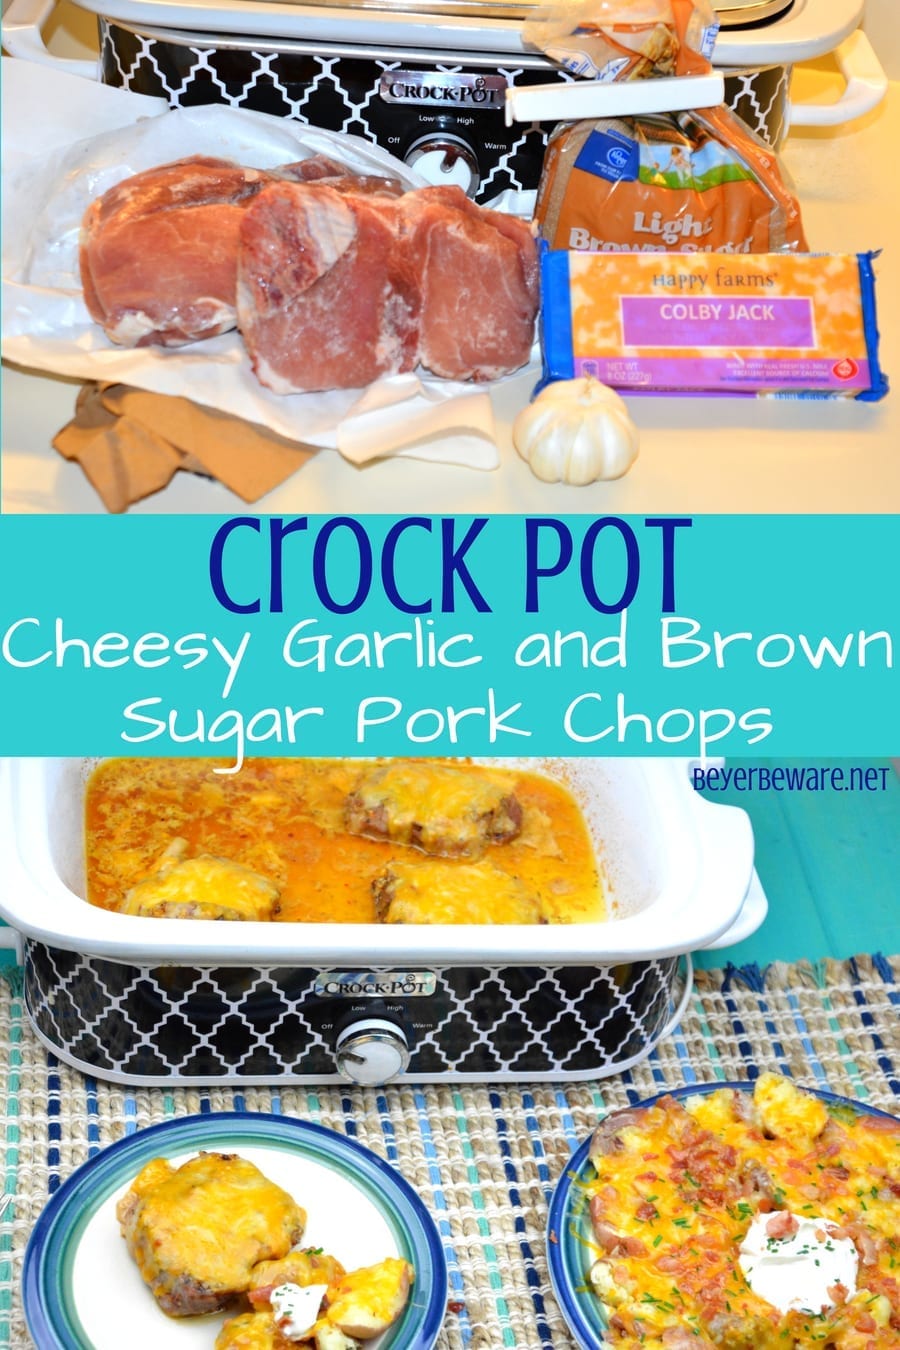 Crock Pot Cheesy Garlic and Brown Sugar Pork Chops are the combination of garlic and brown sugar flavors in the casserole crock pot create the juiciest and flavorful pork chops ready to eat as soon as you get home.